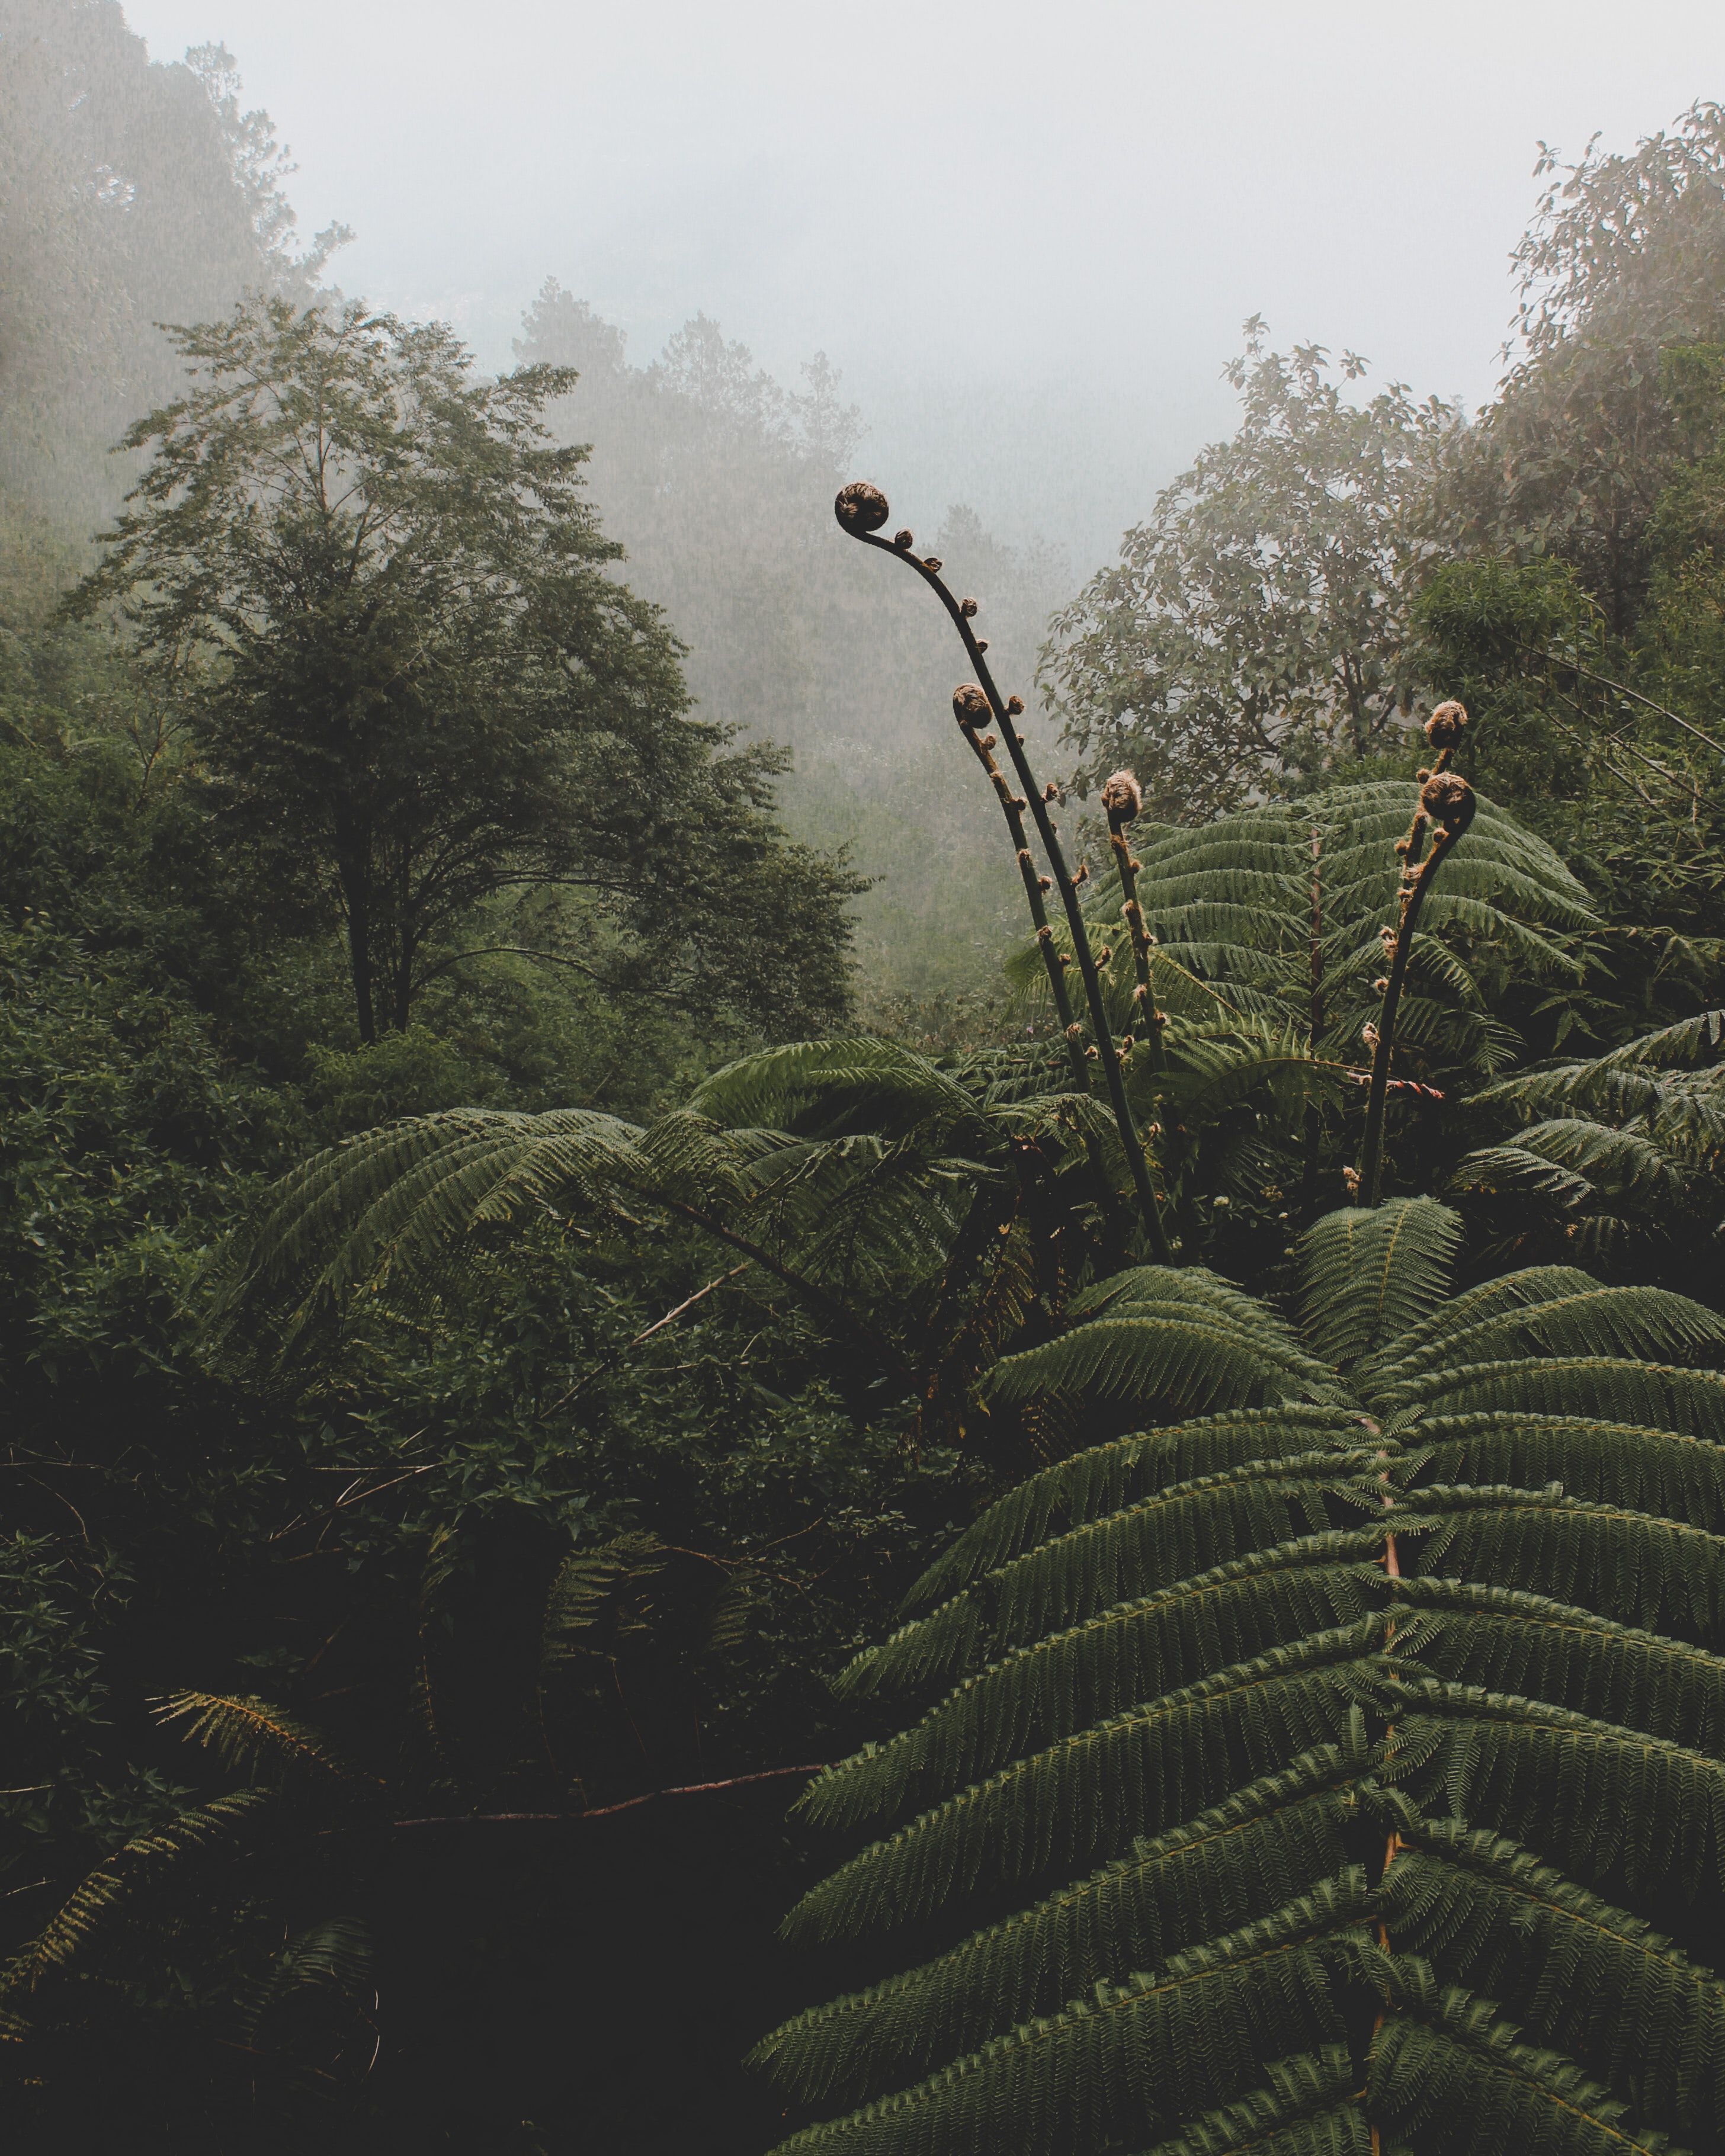 A fern plant in a foggy forest. - Jungle